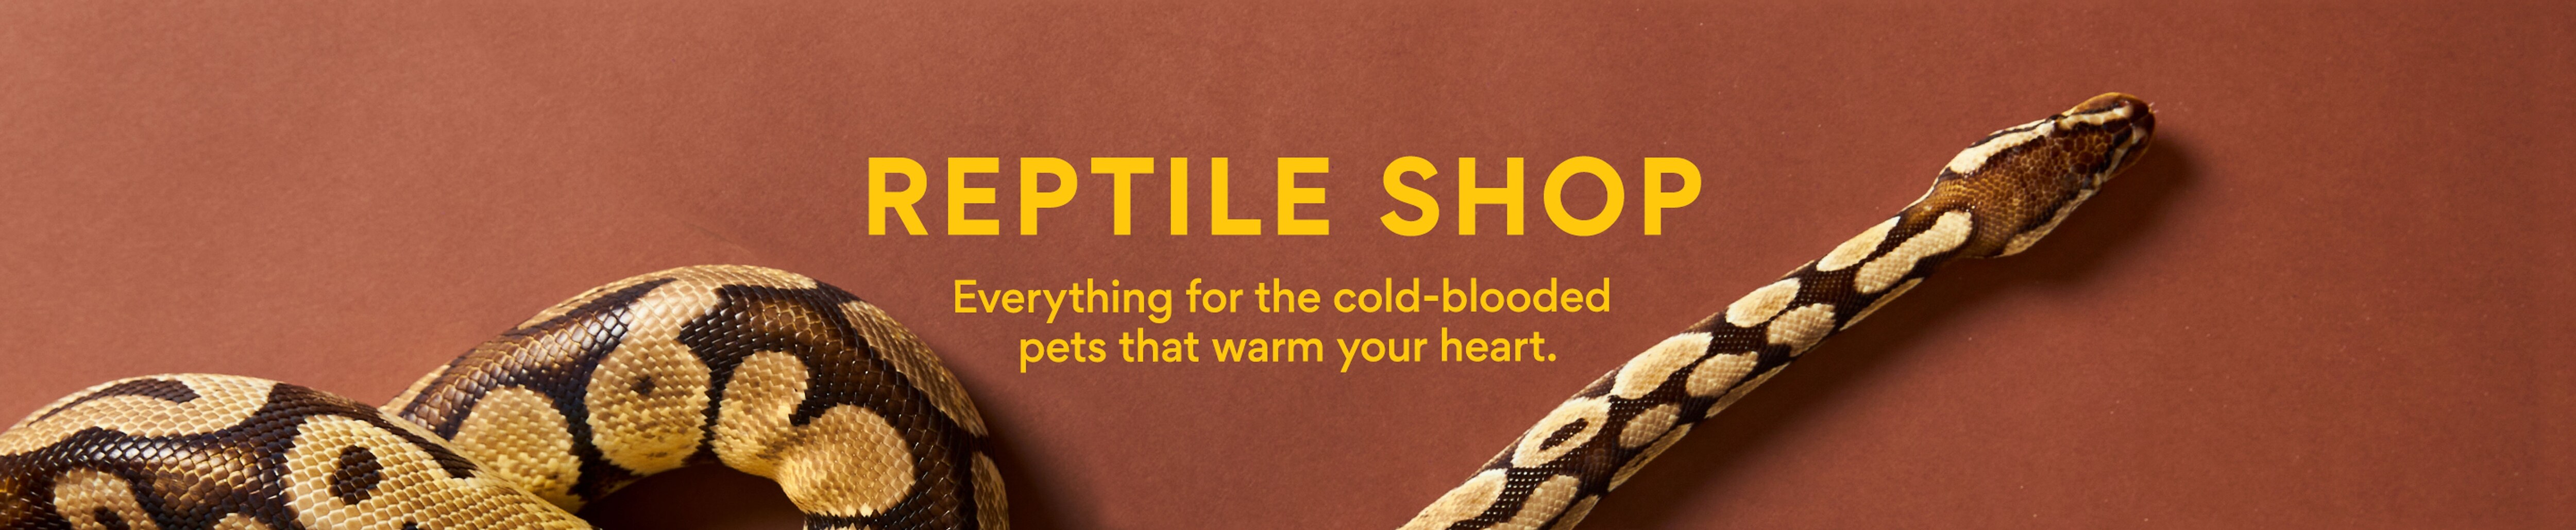 Reptile Shop. Everything for the cold-blooded pets that warm your heart.